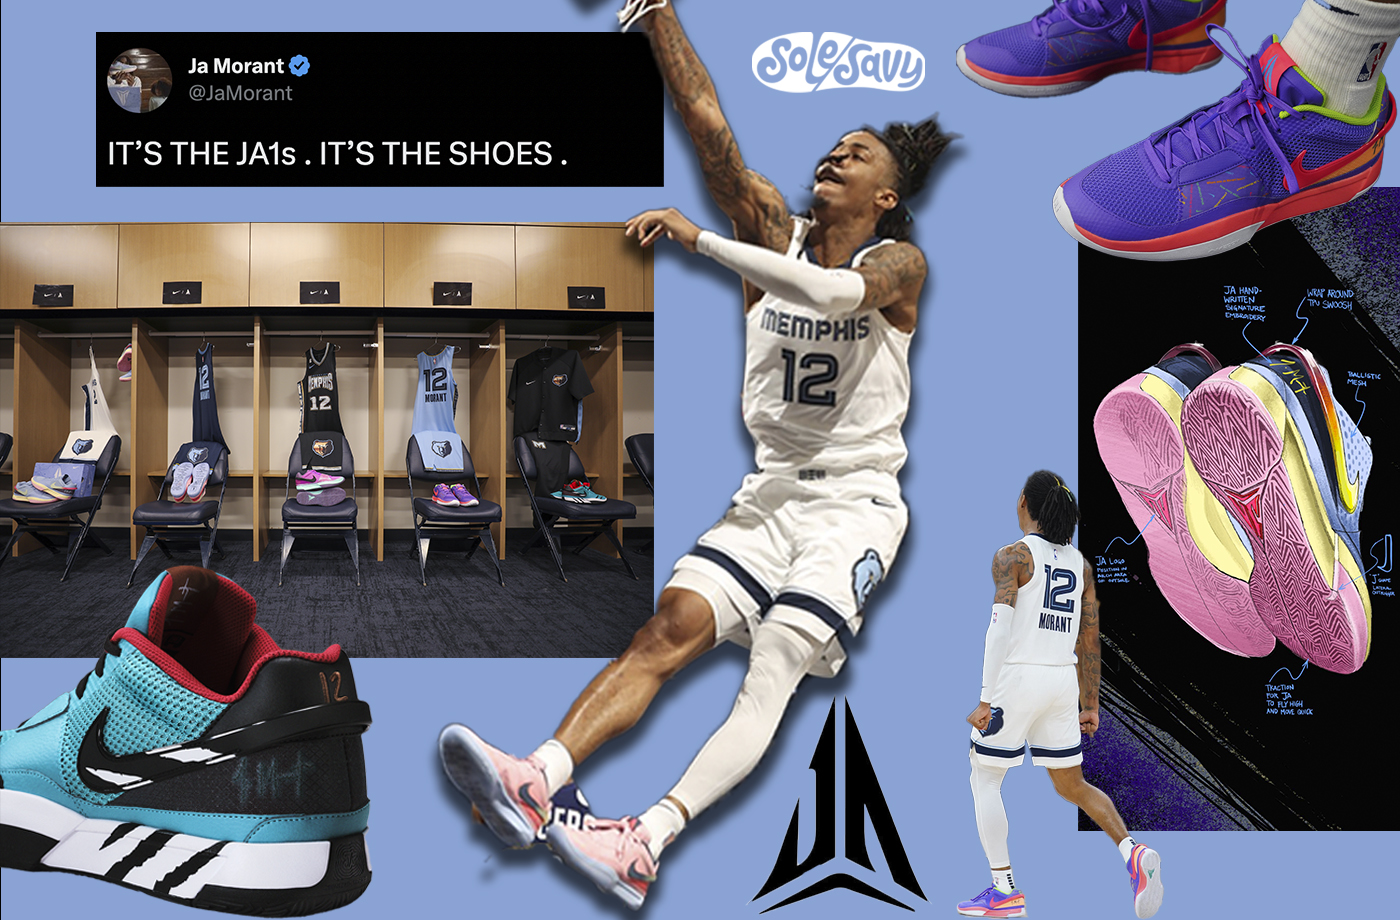 Ja Morant is here for the rumored Grizzlies throwback jerseys